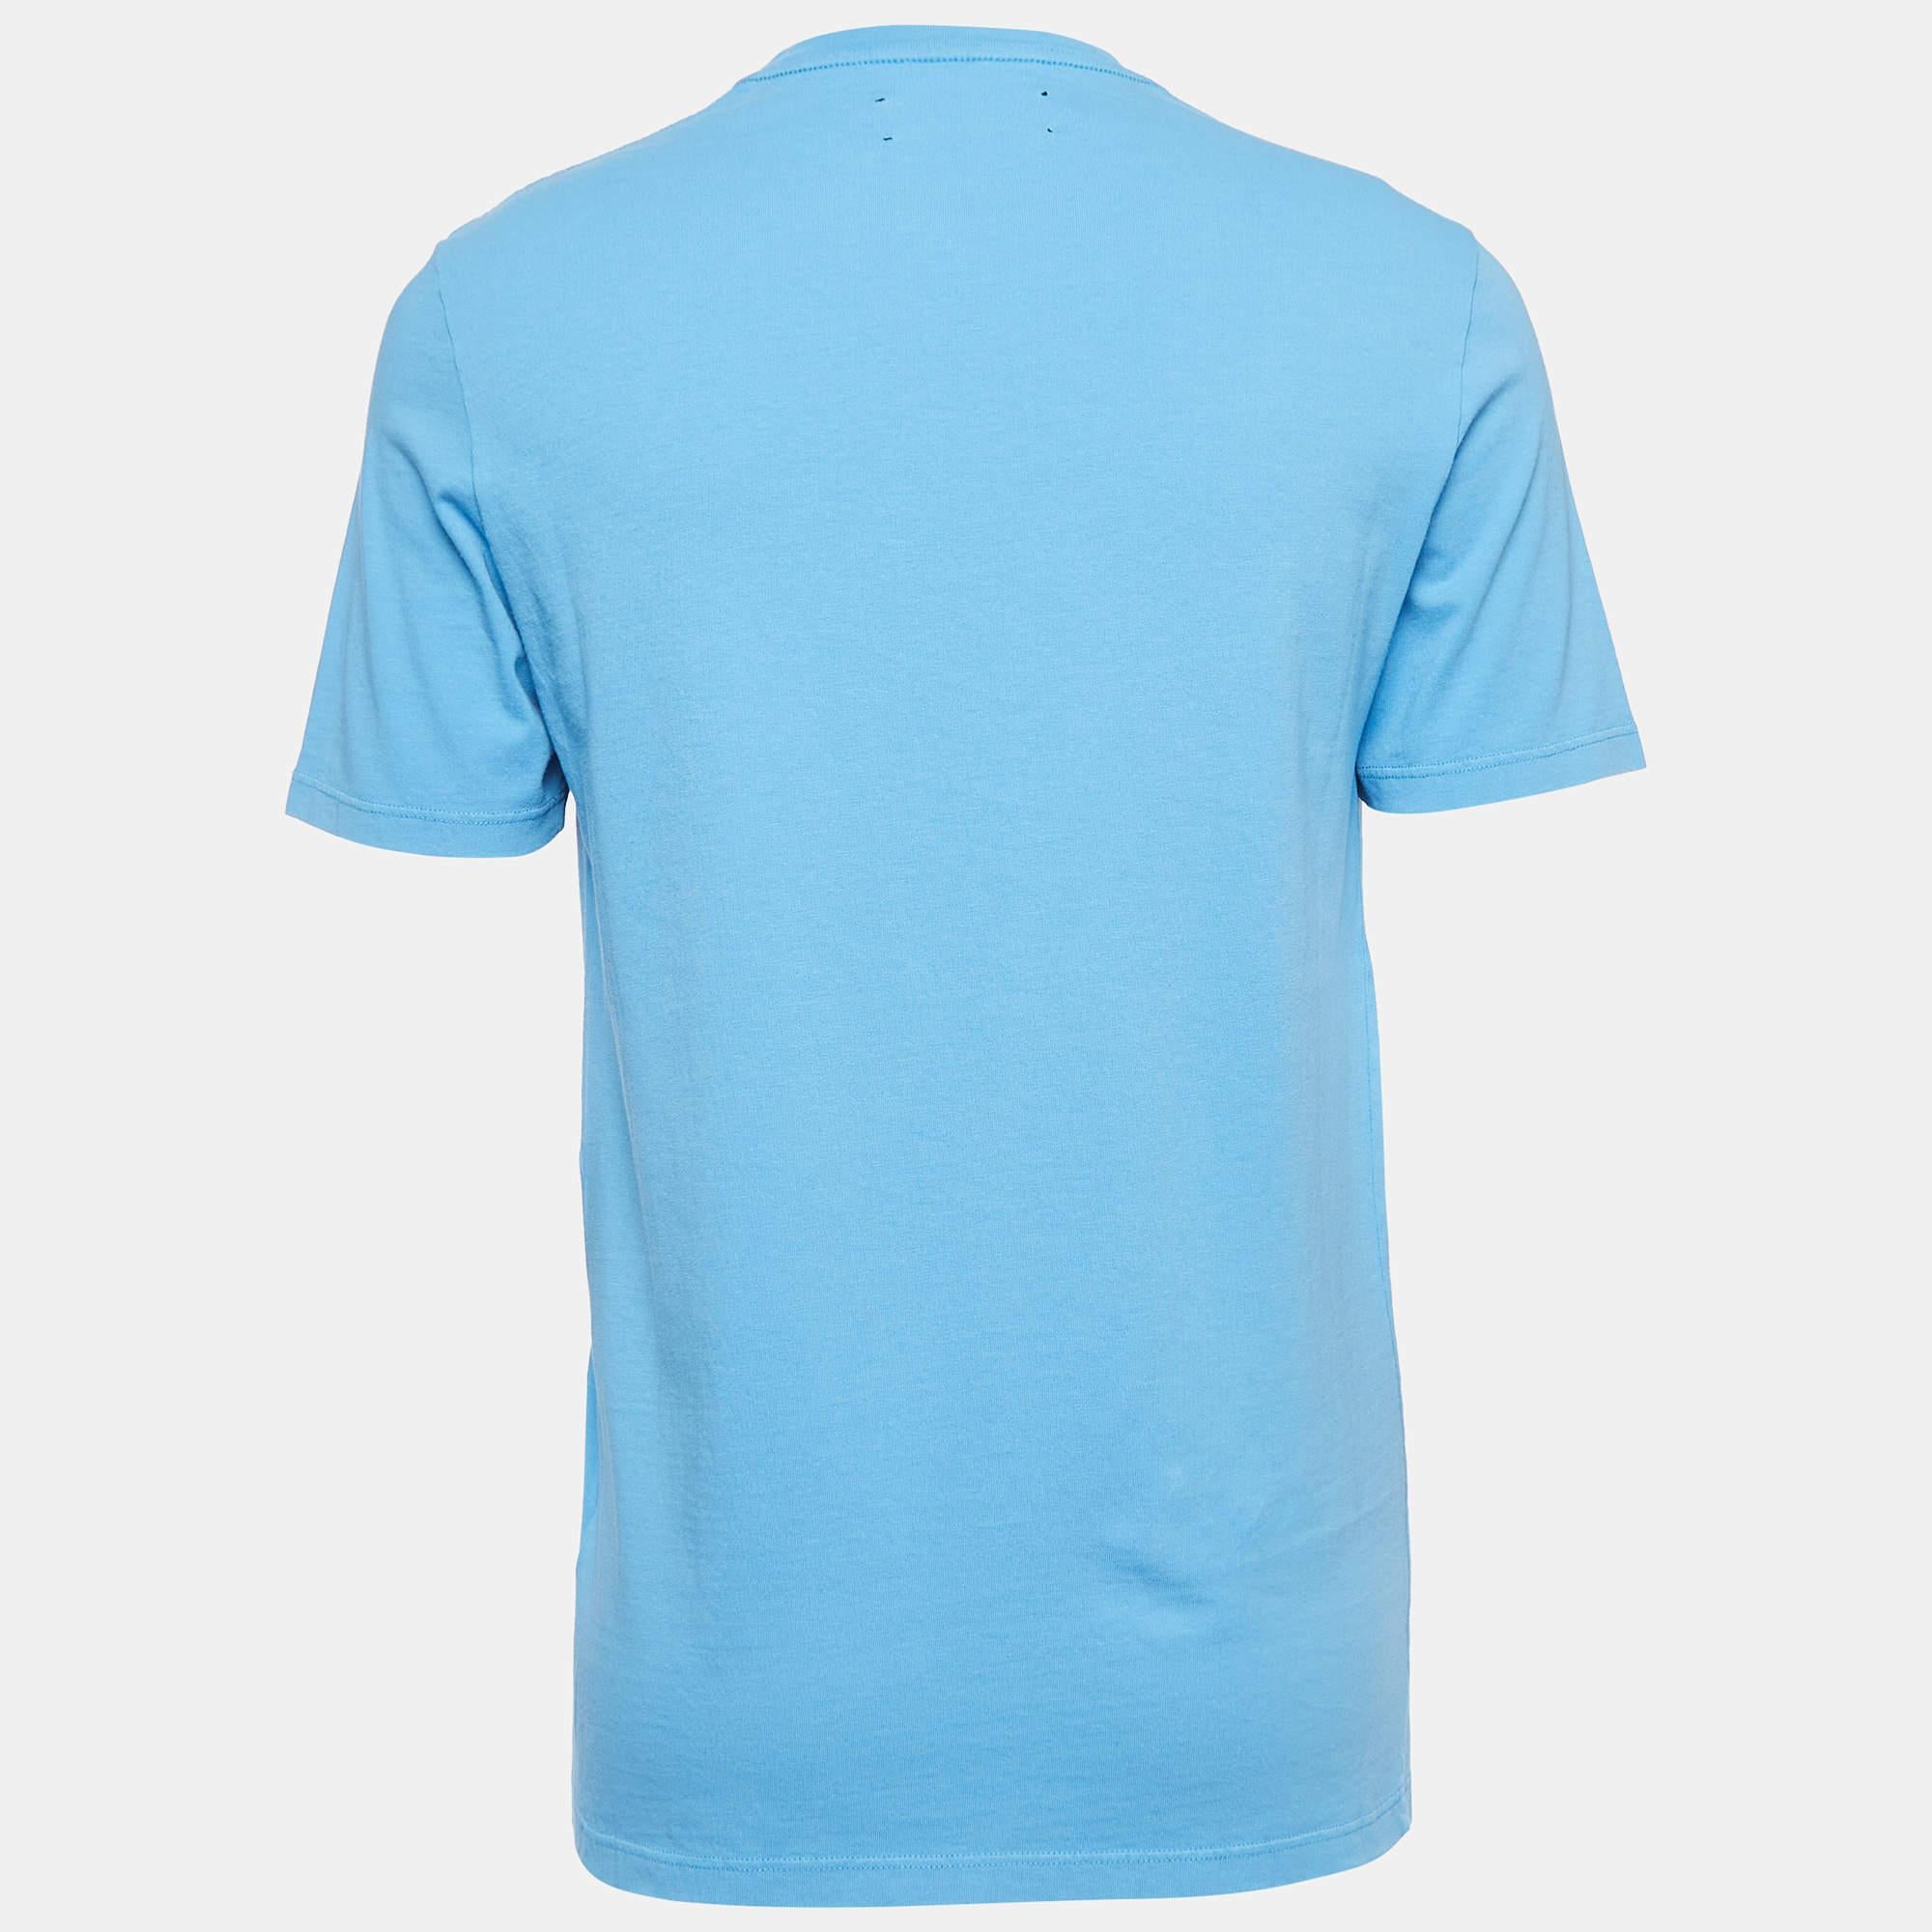 The Amiri t-shirt is a stylish and comfortable wardrobe essential. Crafted from high-quality cotton, it features a unique blue print design. With its half sleeves, this shirt effortlessly combines fashion and comfort for a versatile and trendy